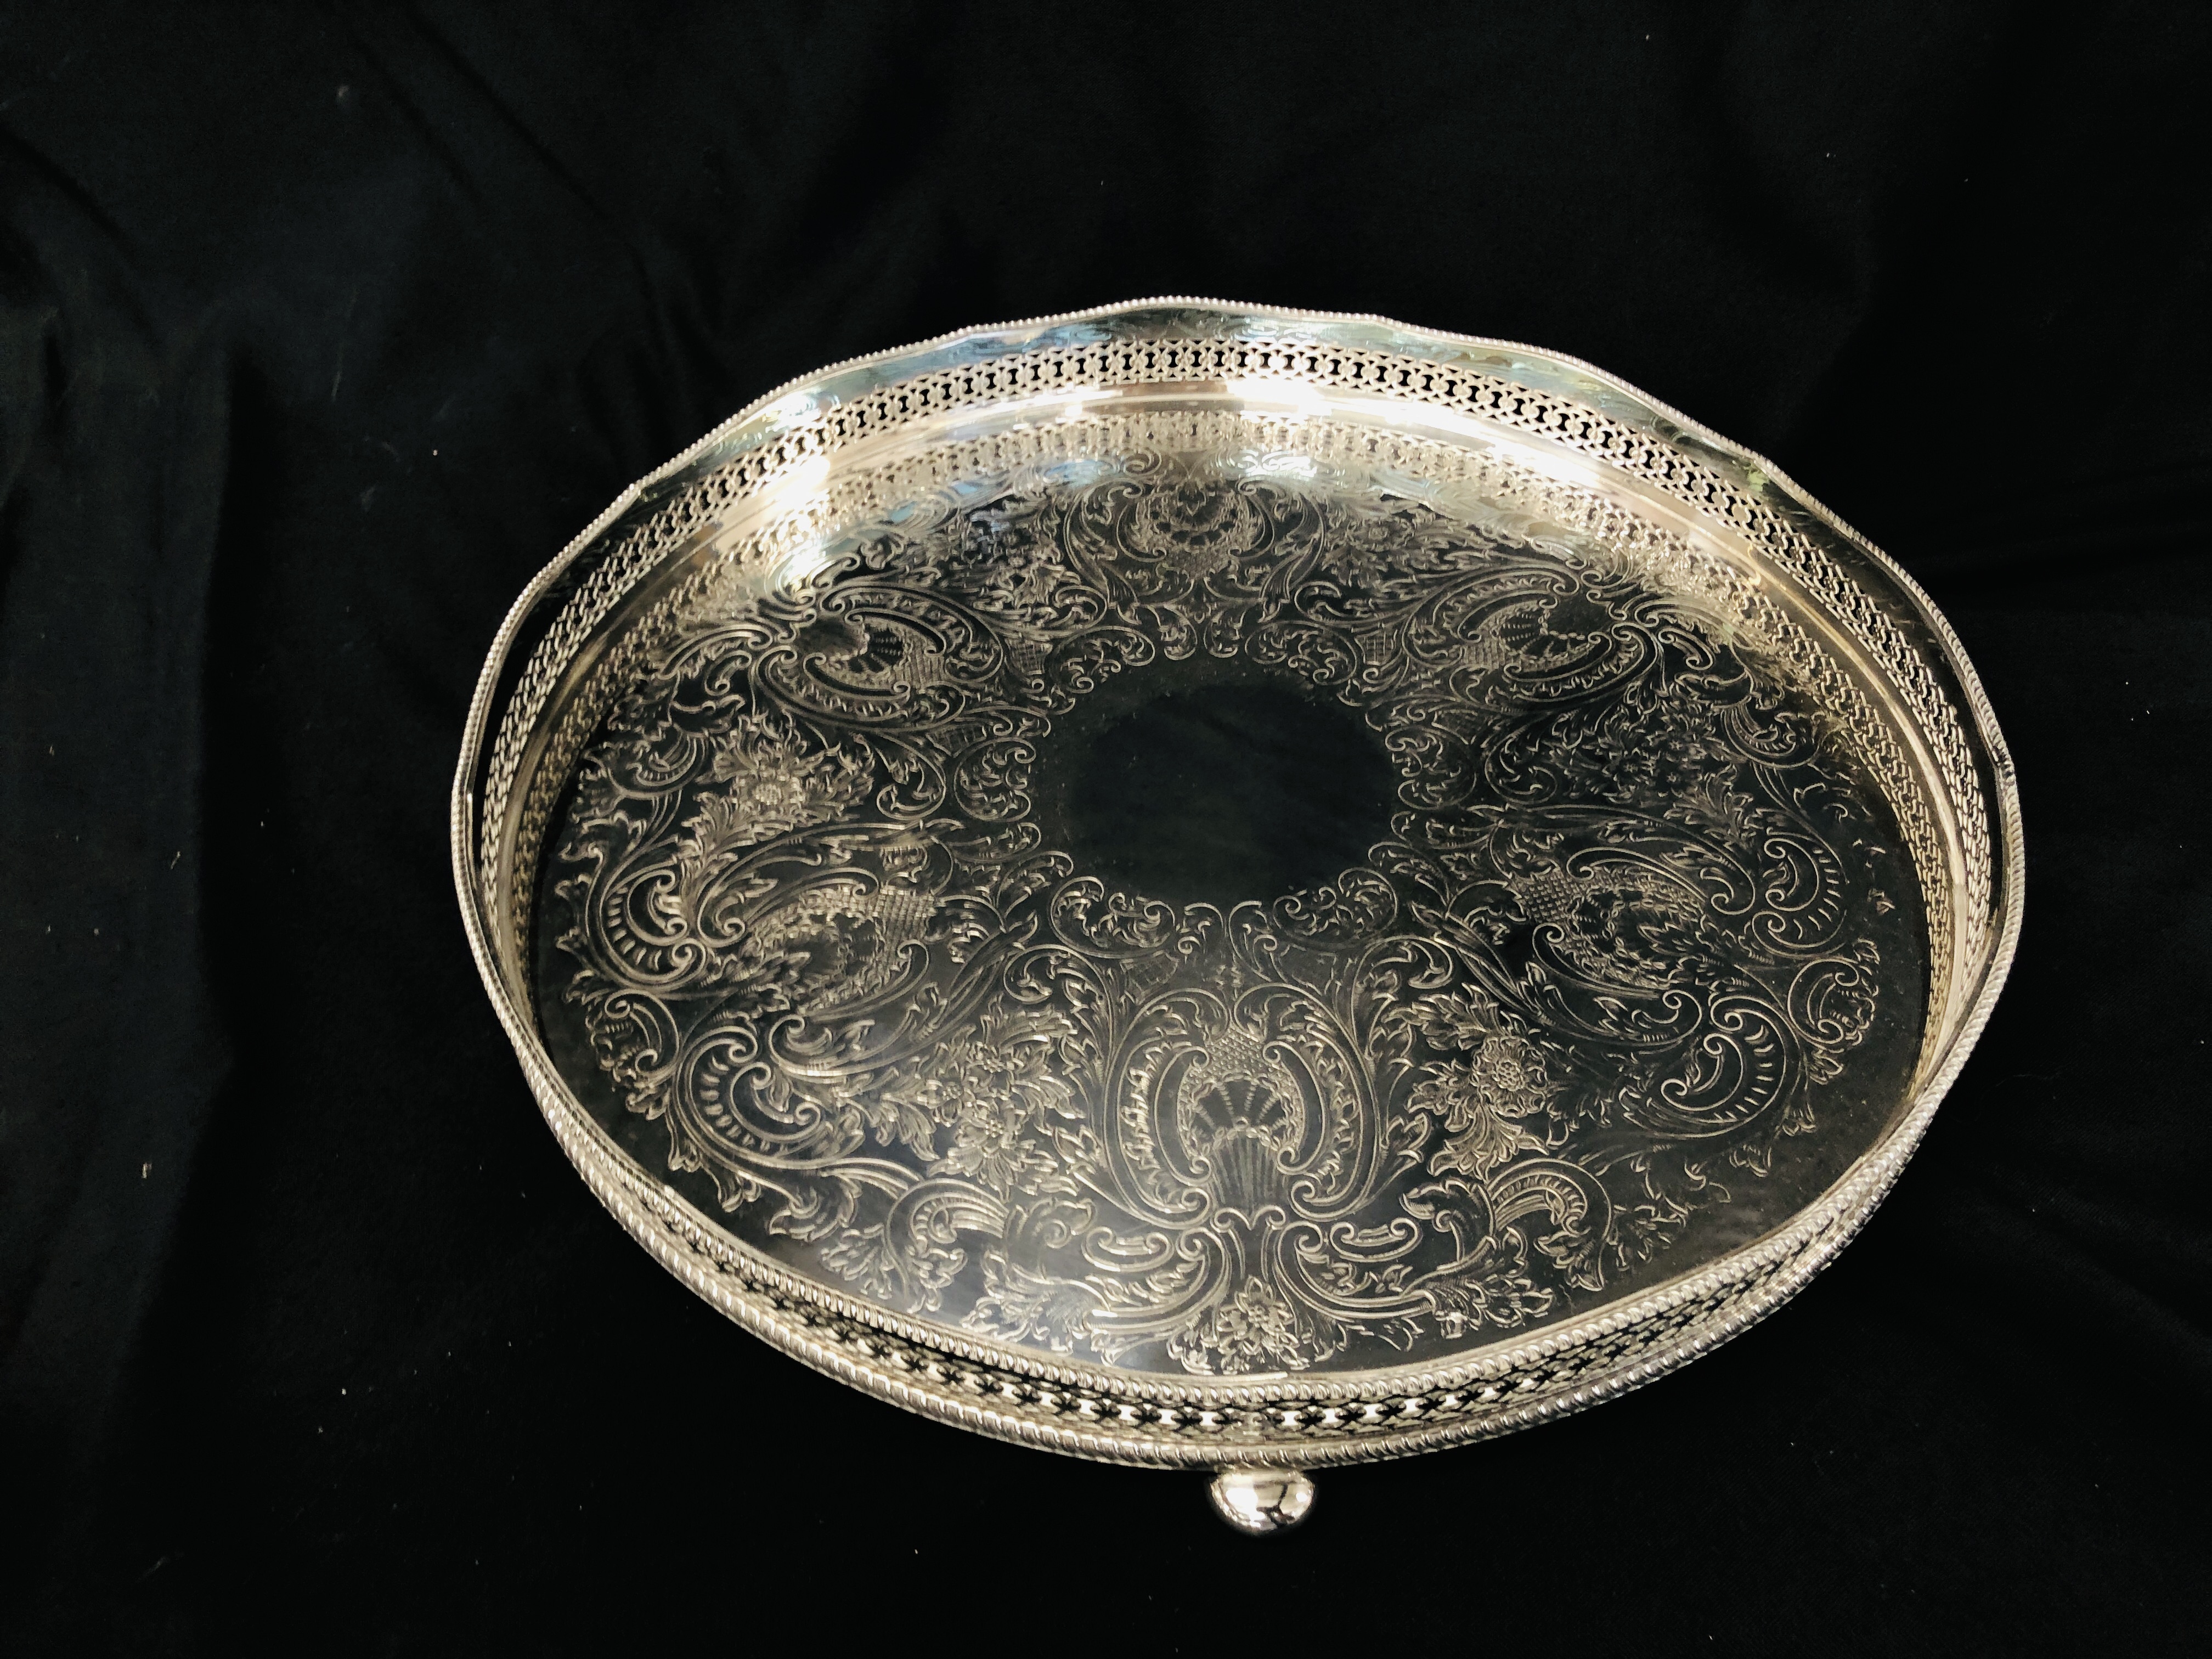 CIRCULAR SILVER PLATED TRAY MARKED "BARBER ELLIS" ALONG WITH A SET OF 6 STUART CUT GLASS WINE - Image 5 of 6